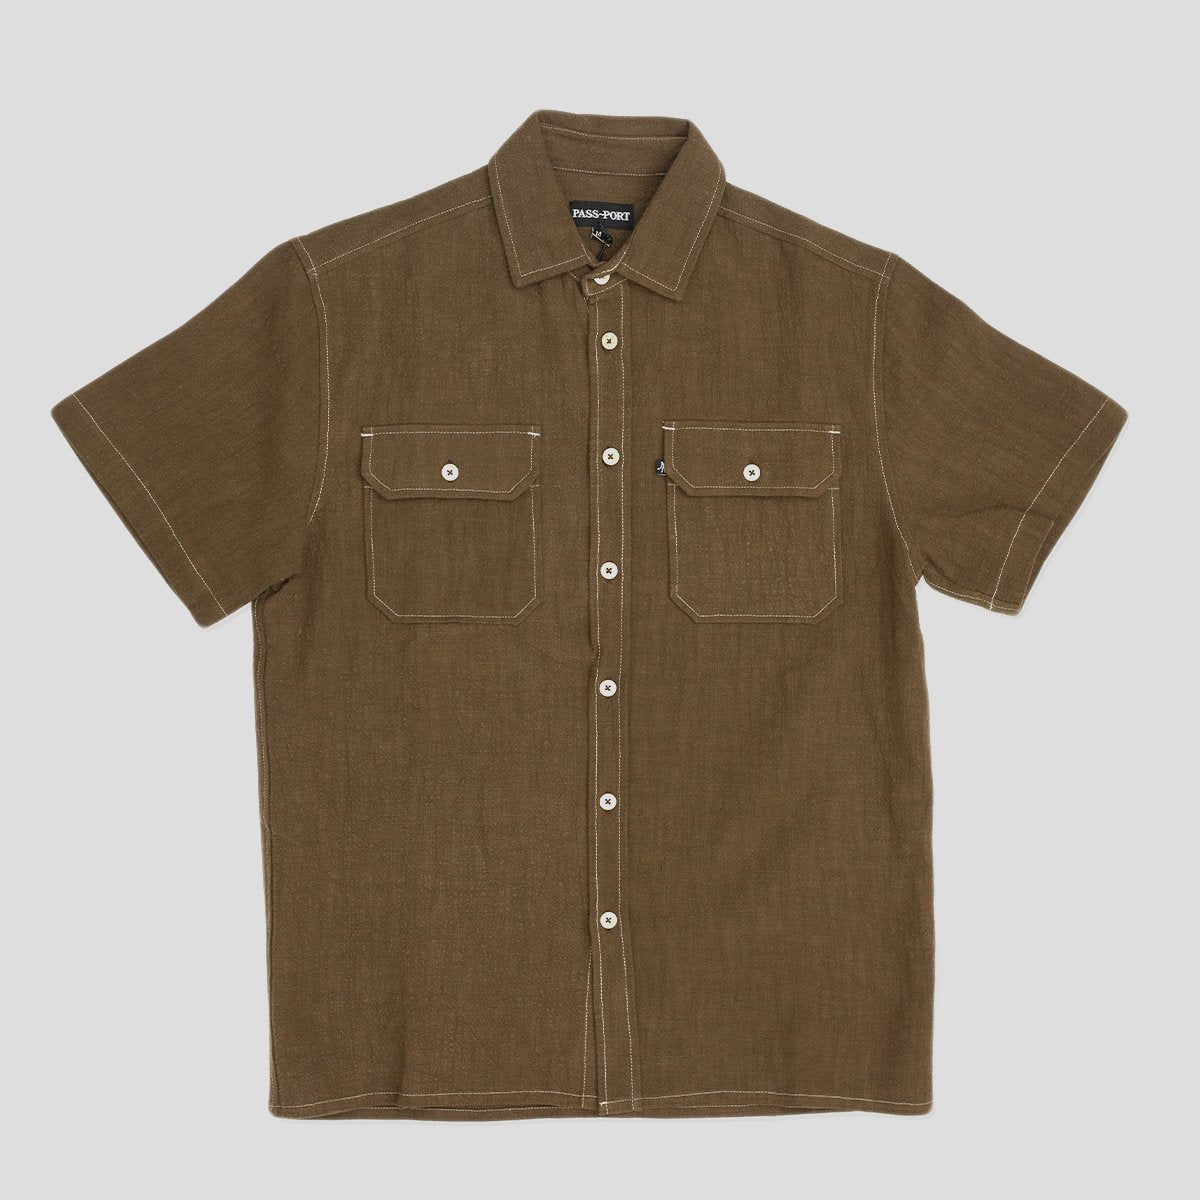 PASS~PORT "WORKERS CONTRAST" S/S SHIRT RUST